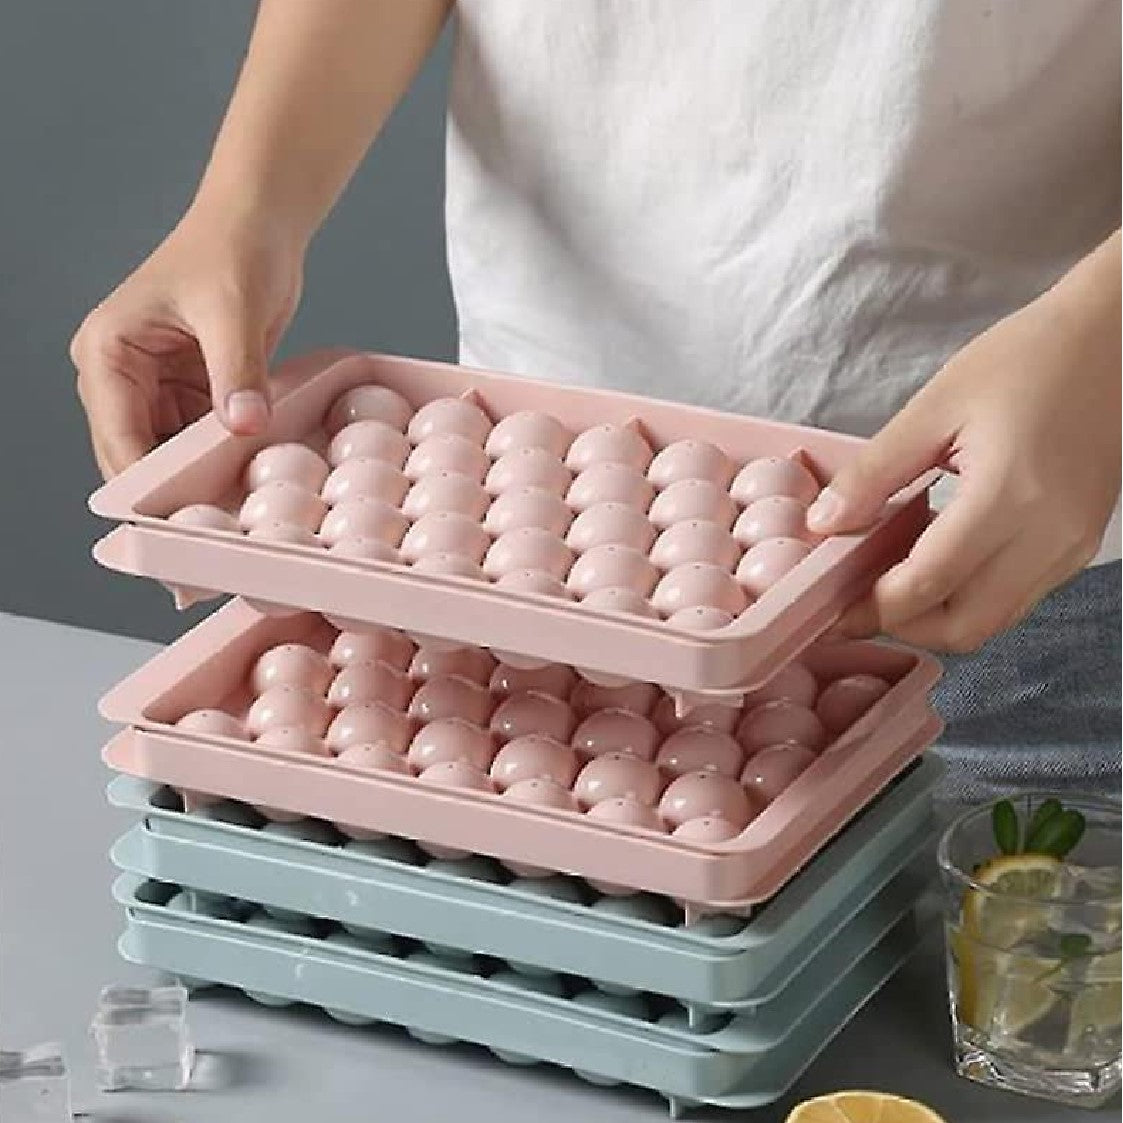 2pcs Sphere Ice Molds, Ice Cube Trays Large Silicon Ice Cubes Mold